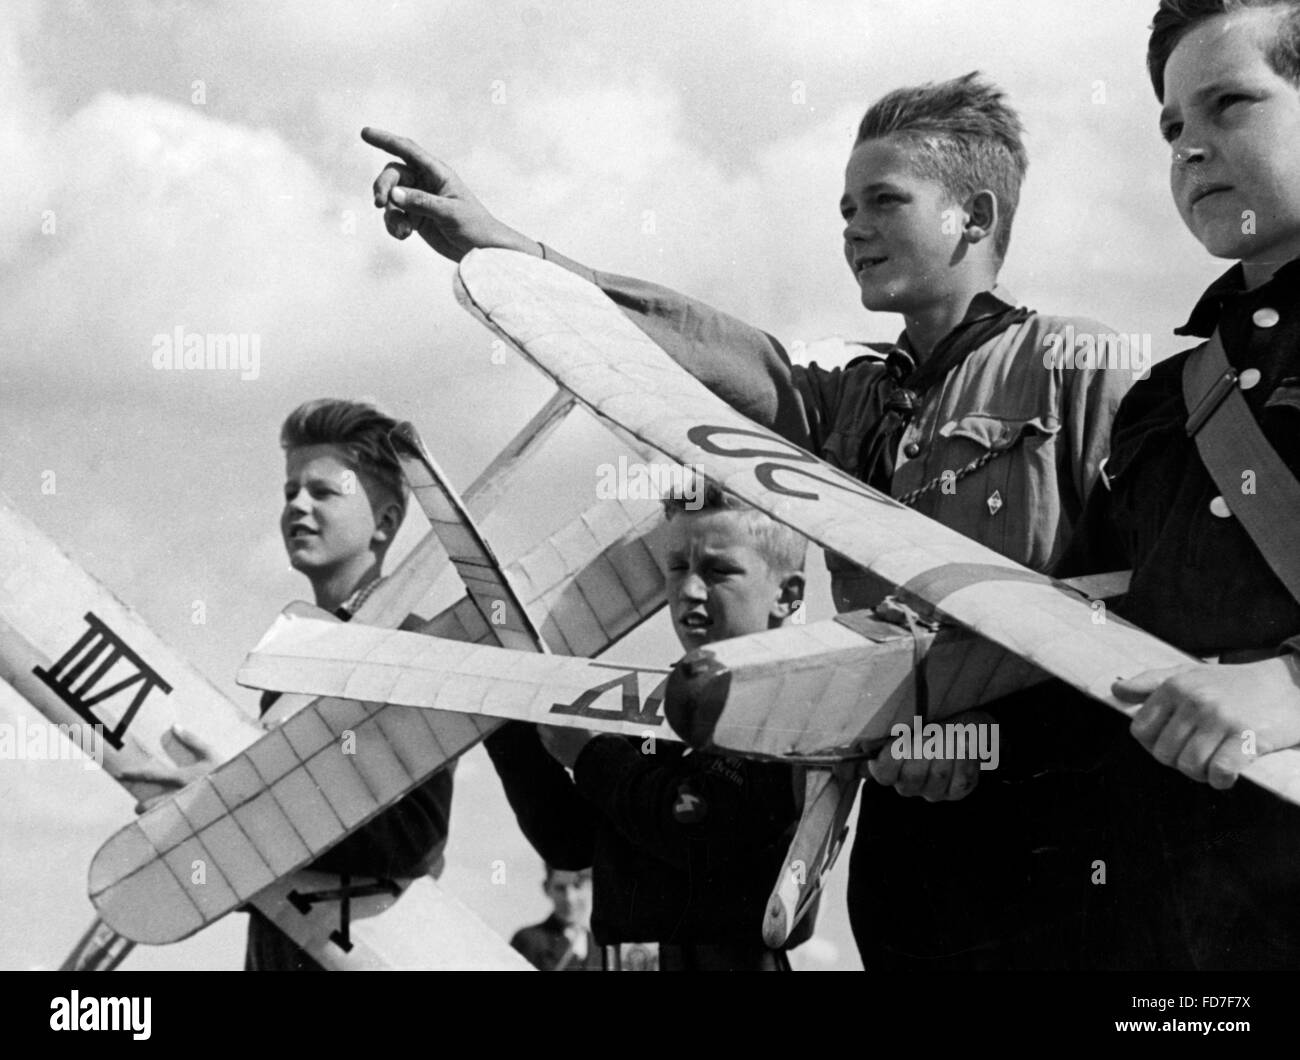 HJ members with model airplanes, 1940 Stock Photo